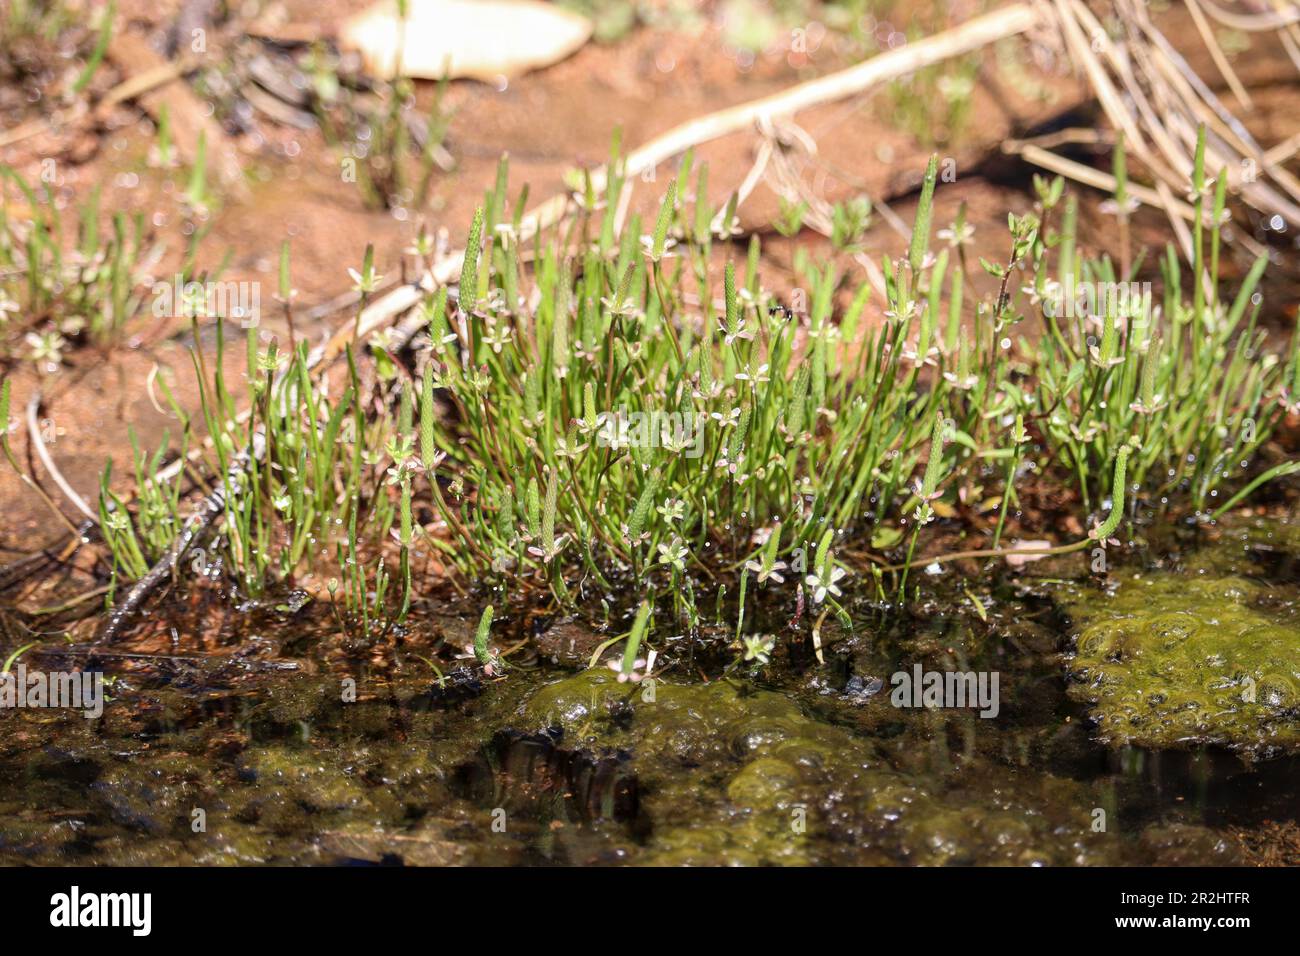 Tiny mousetail or Myosurus minimus growing along a creak at the Payson college trail in Arizona. Stock Photo